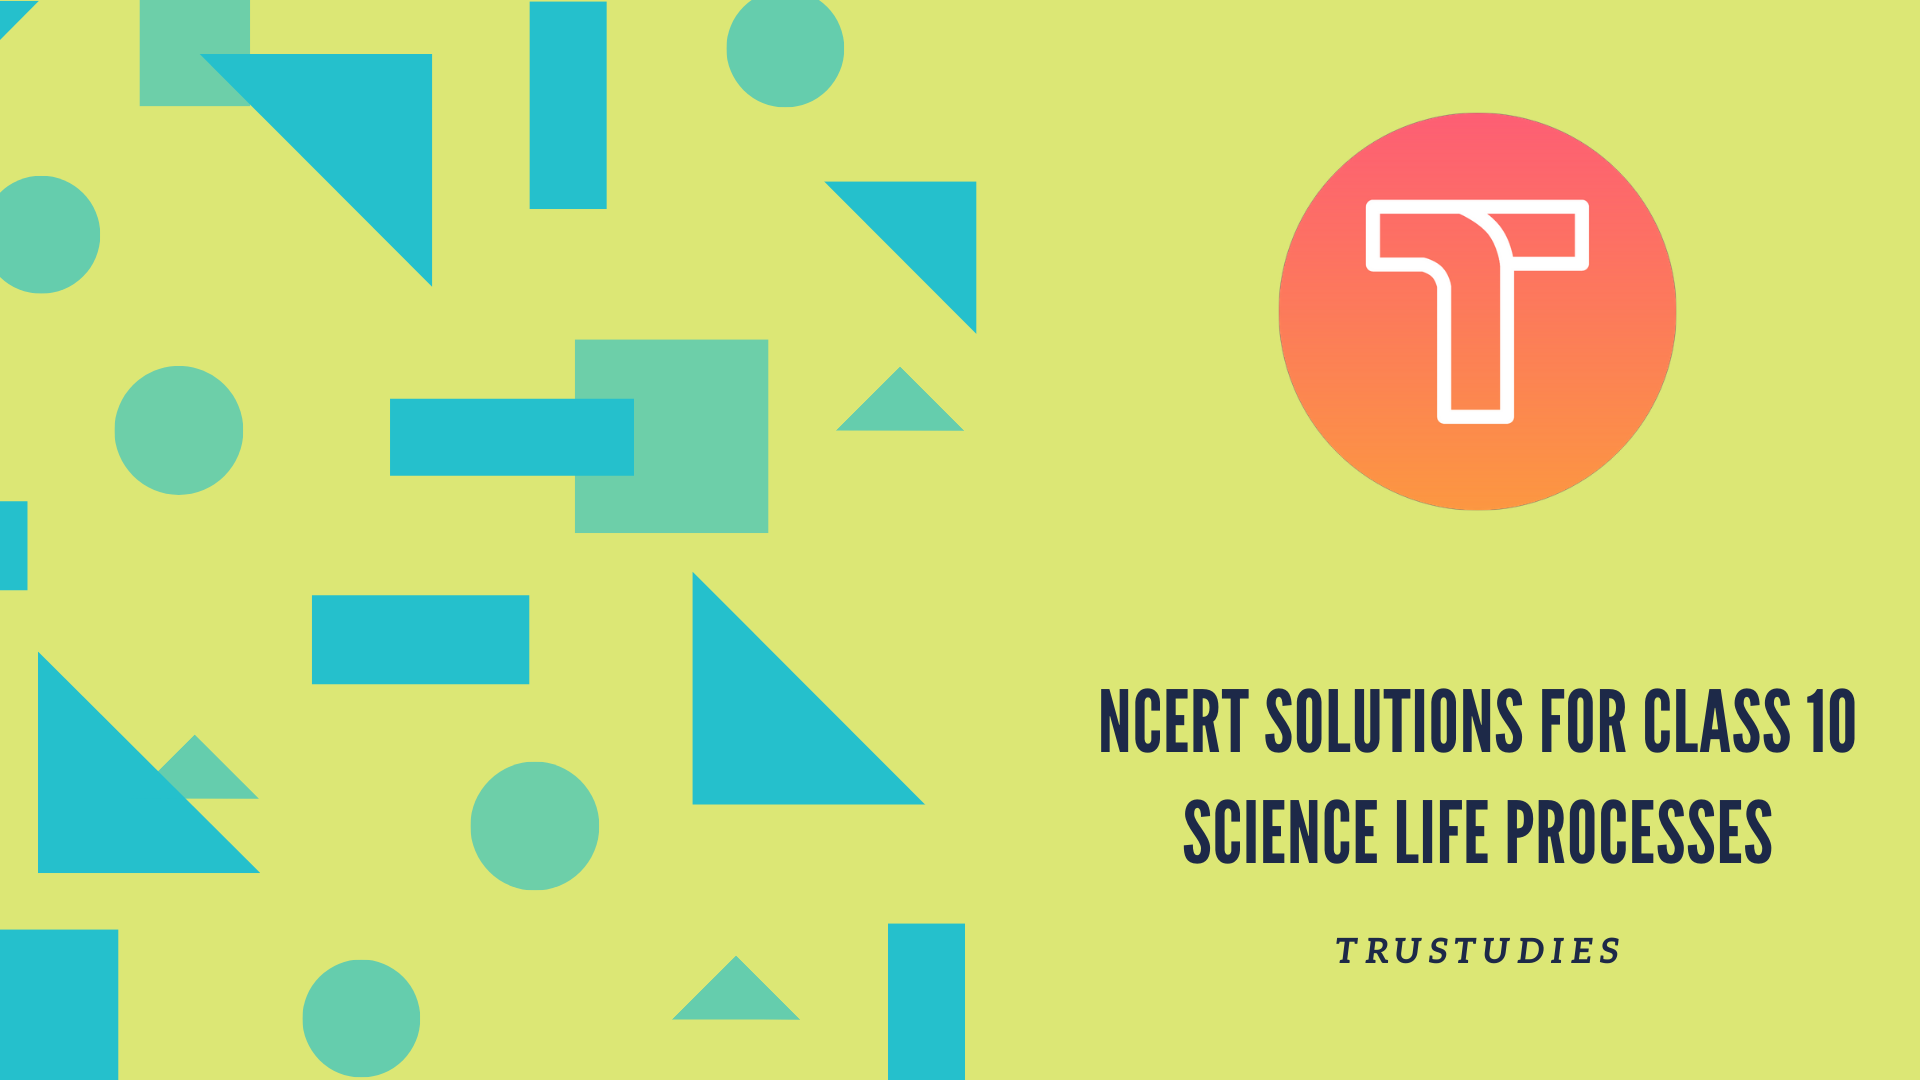 NCERT solutions for class 10 science chapter 6 life processes banner image